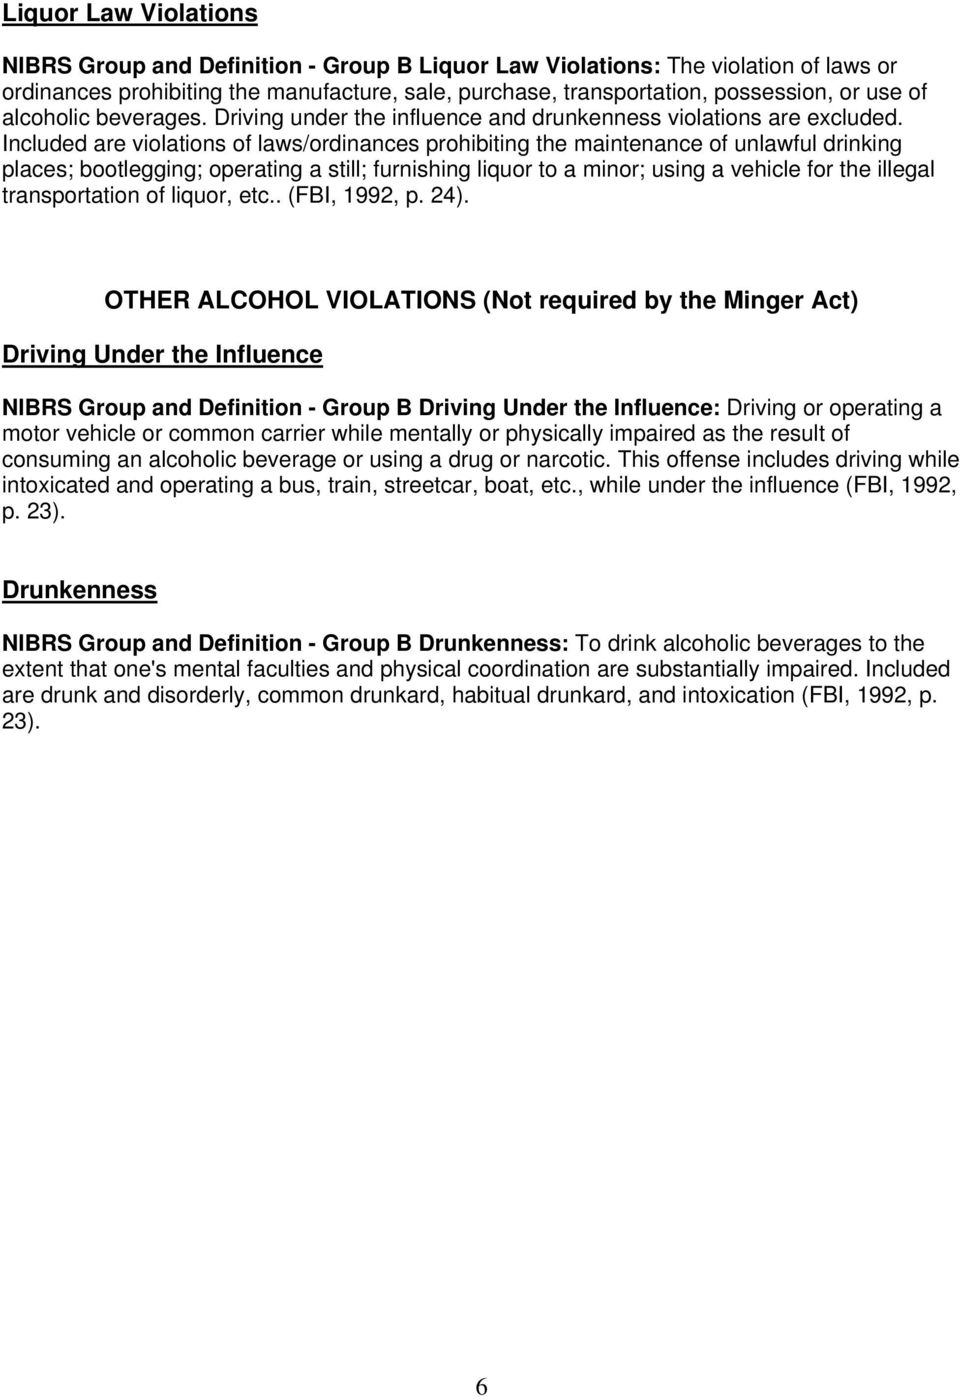 Included are violations of laws/ordinances prohibiting the maintenance of unlawful drinking places; bootlegging; operating a still; furnishing liquor to a minor; using a vehicle for the illegal